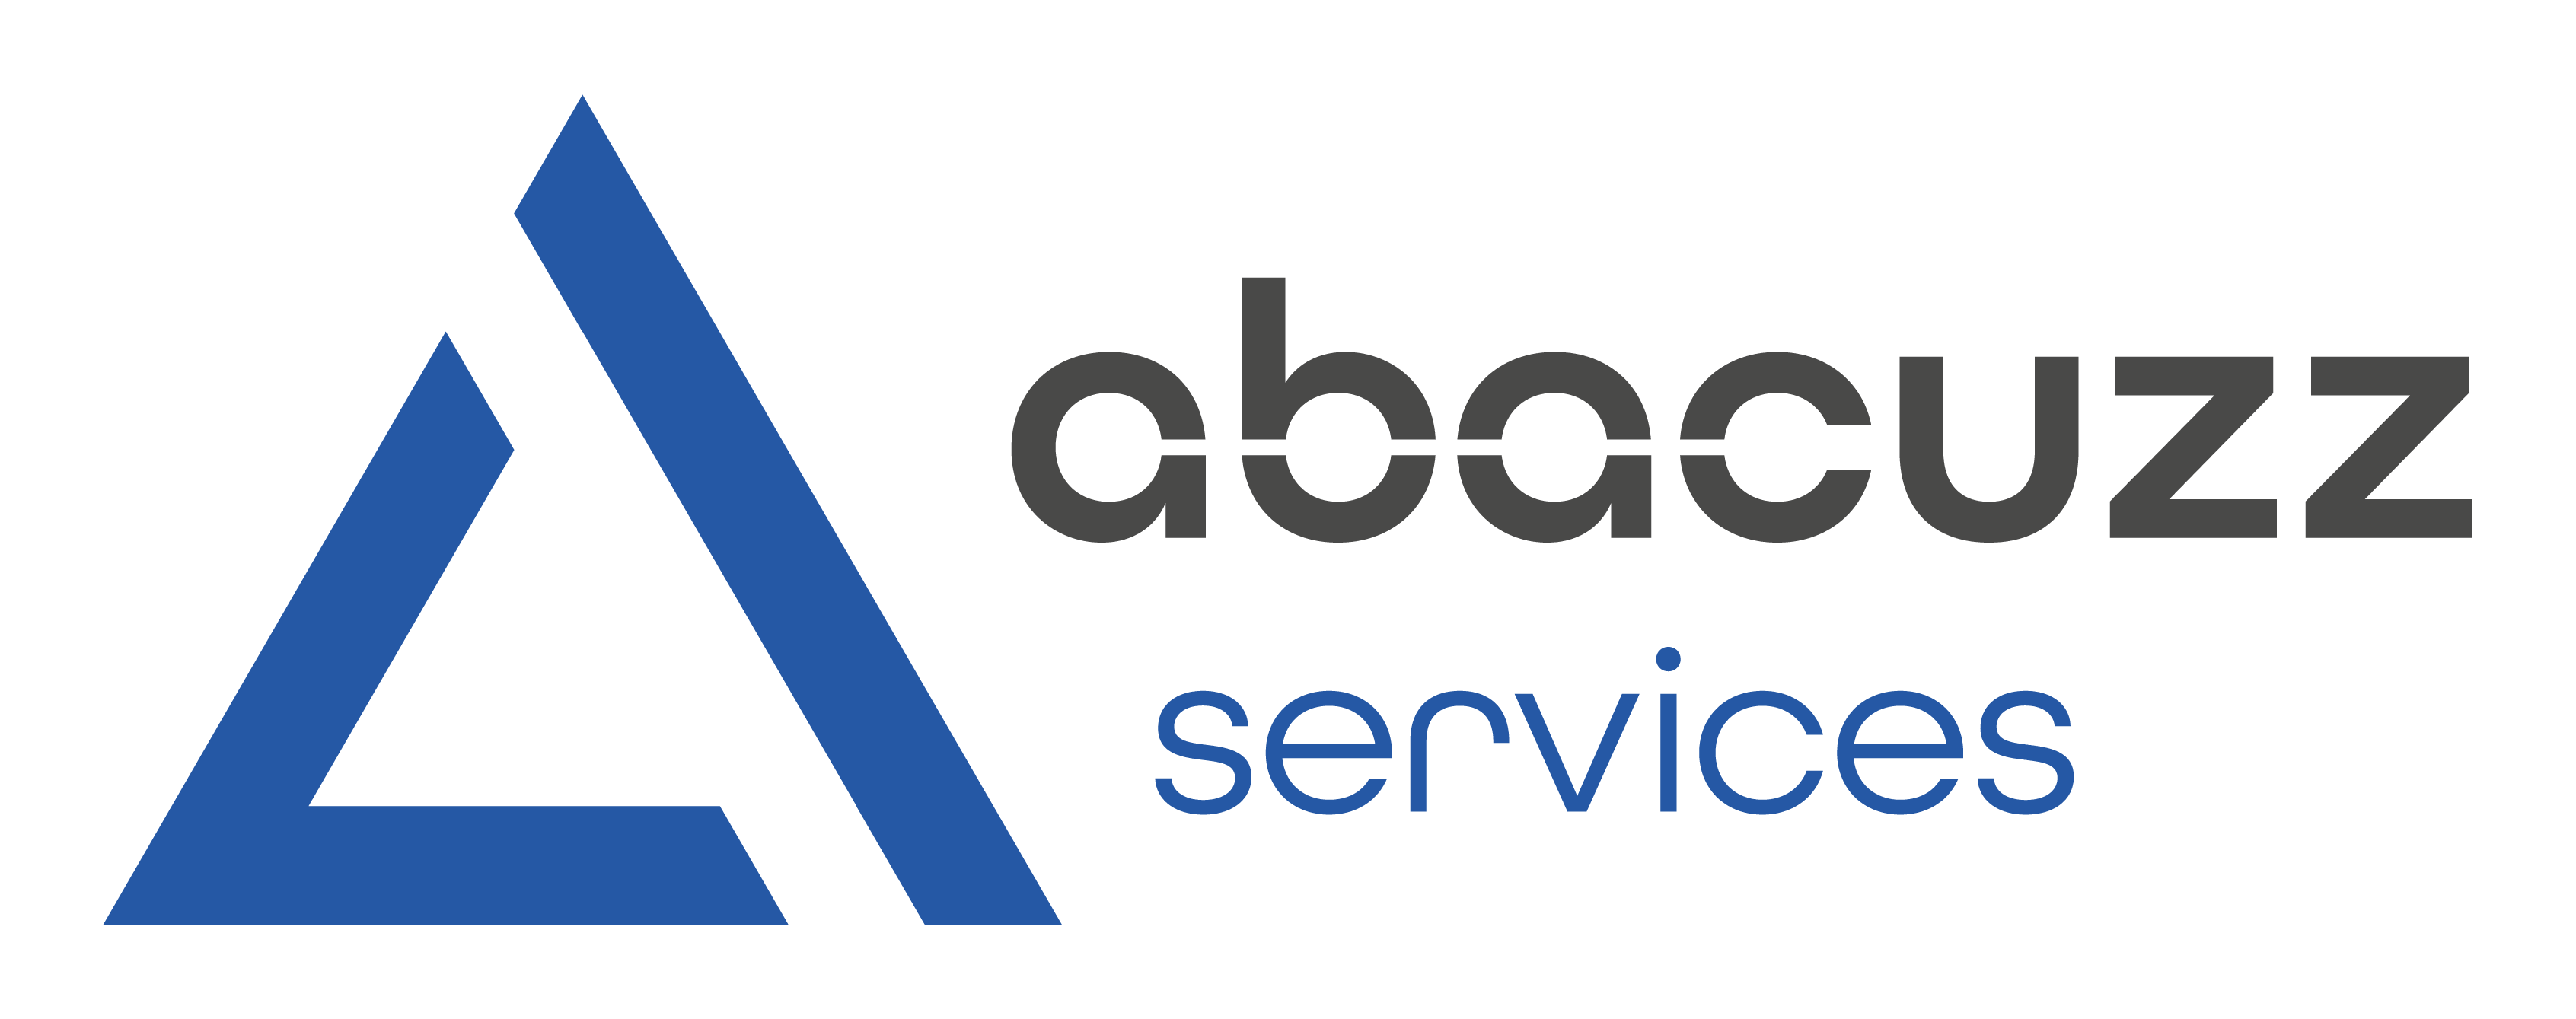 Abacuzz SERVICES